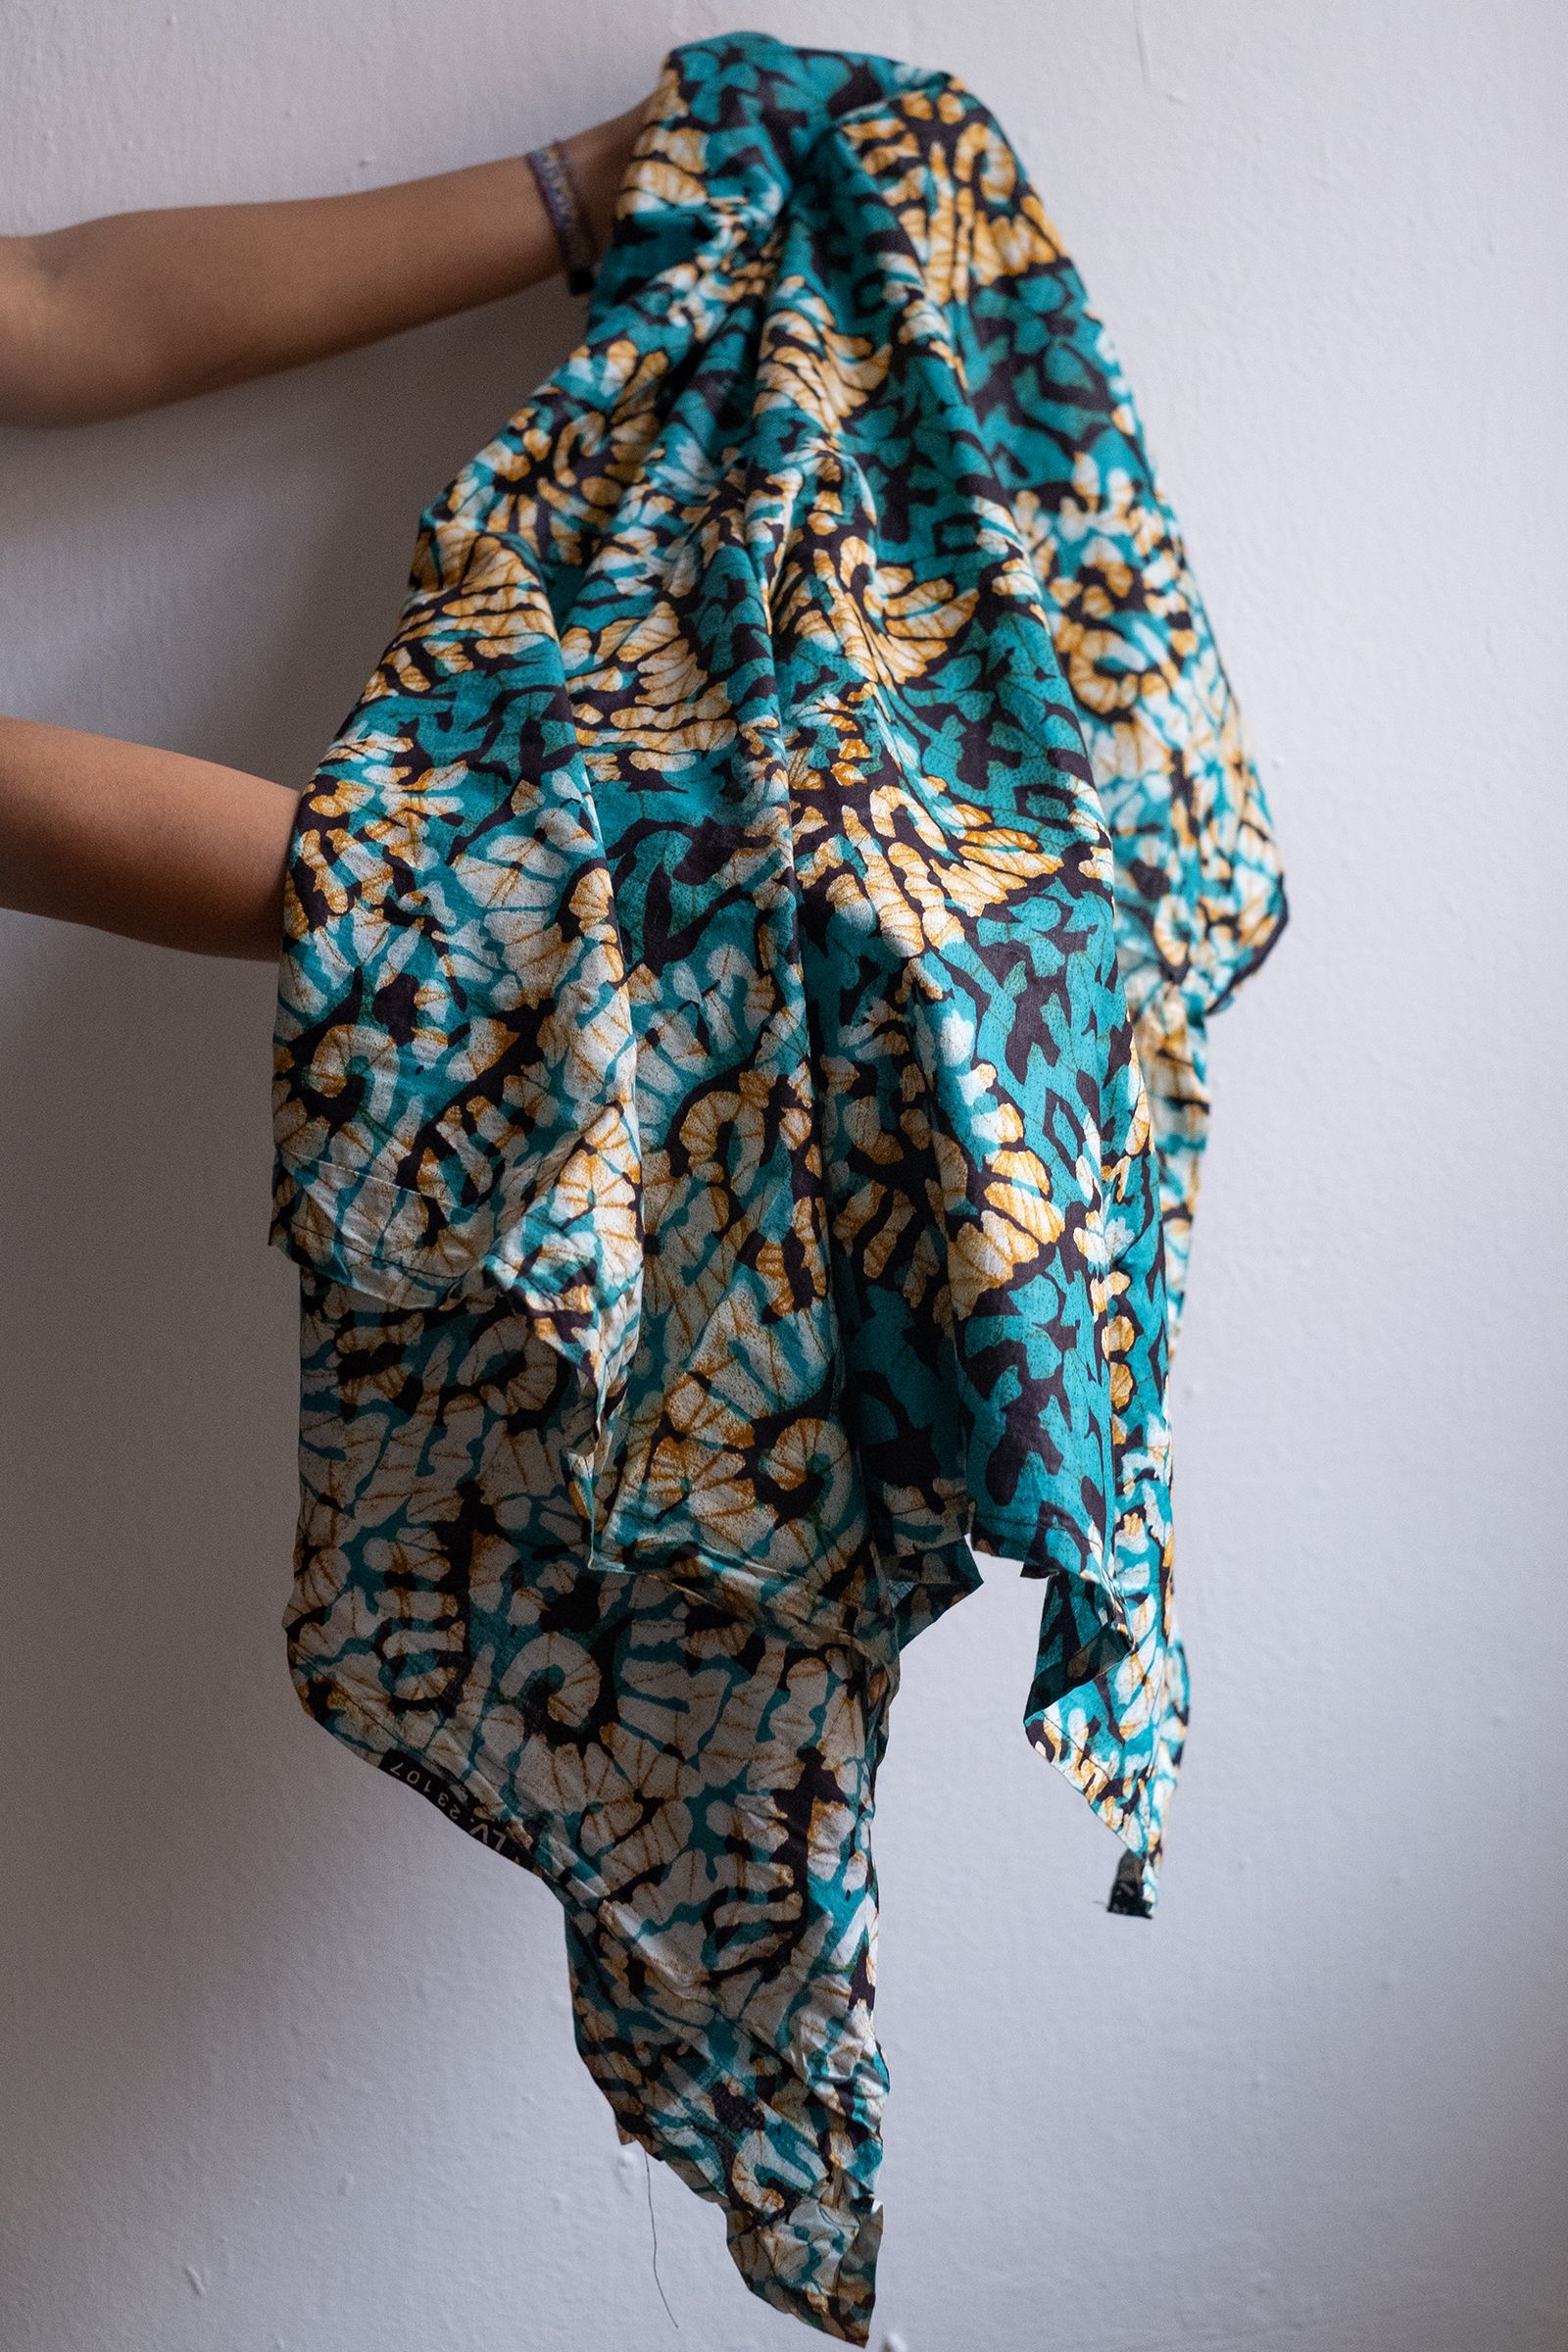 © Sina Opalka - Patterns of my origins. This scarf is a gift of Jasmins grandmother from Benin. It means a lot to her.